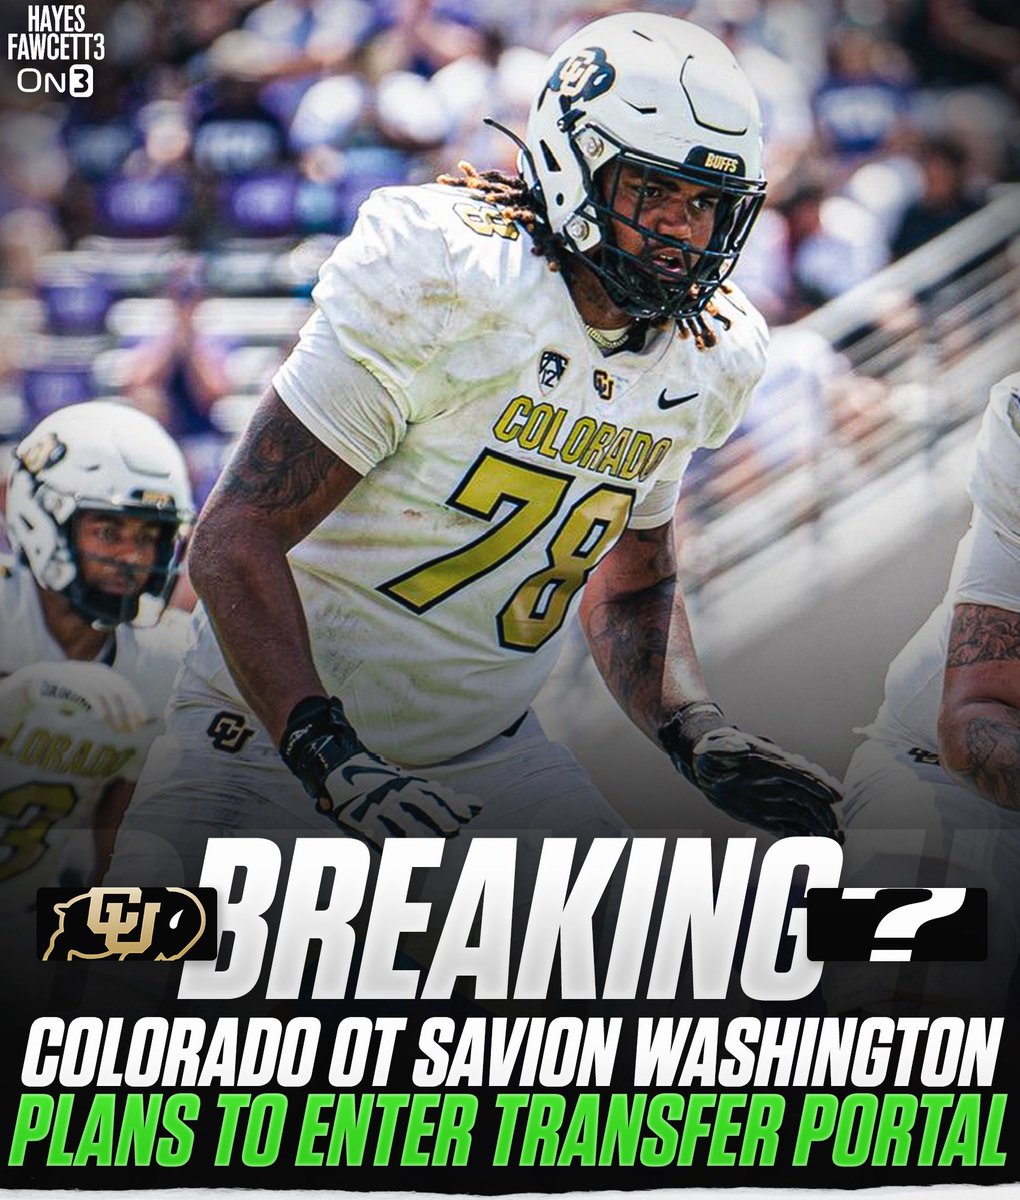 BREAKING: Colorado OT Savion Washington plans to enter the Transfer Portal, he tells @on3sports The 6’9 325 OT started 10 games for the Buffaloes in 2023 (missed 2 due to injury) Will have 1 year of eligibility remaining on3.com/db/savion-wash…